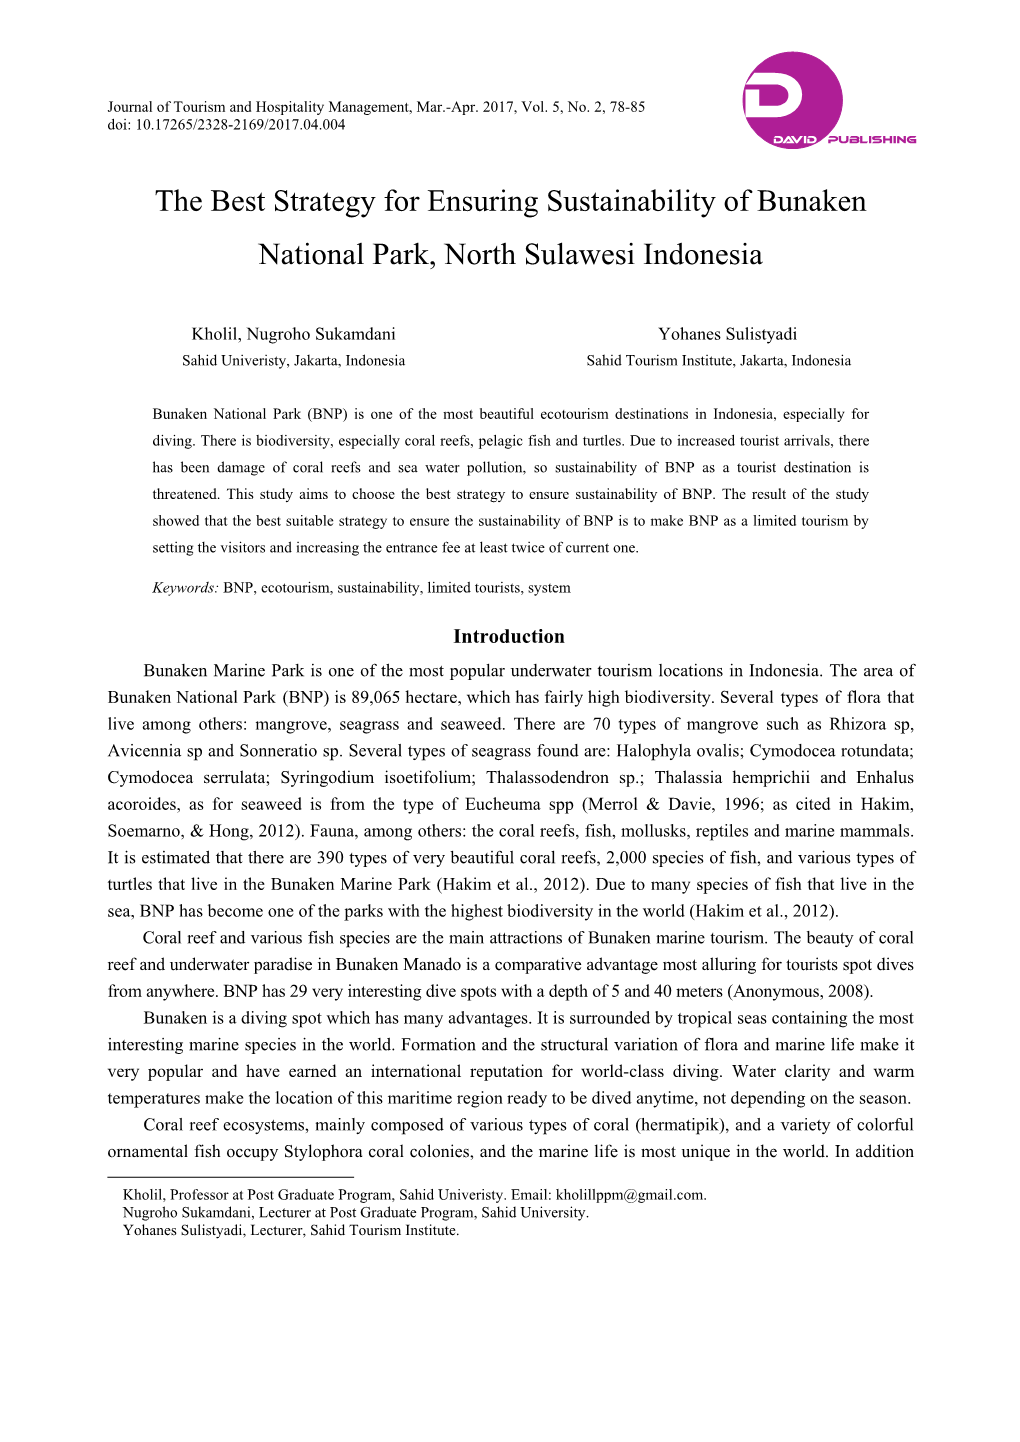 The Best Strategy for Ensuring Sustainability of Bunaken National Park, North Sulawesi Indonesia